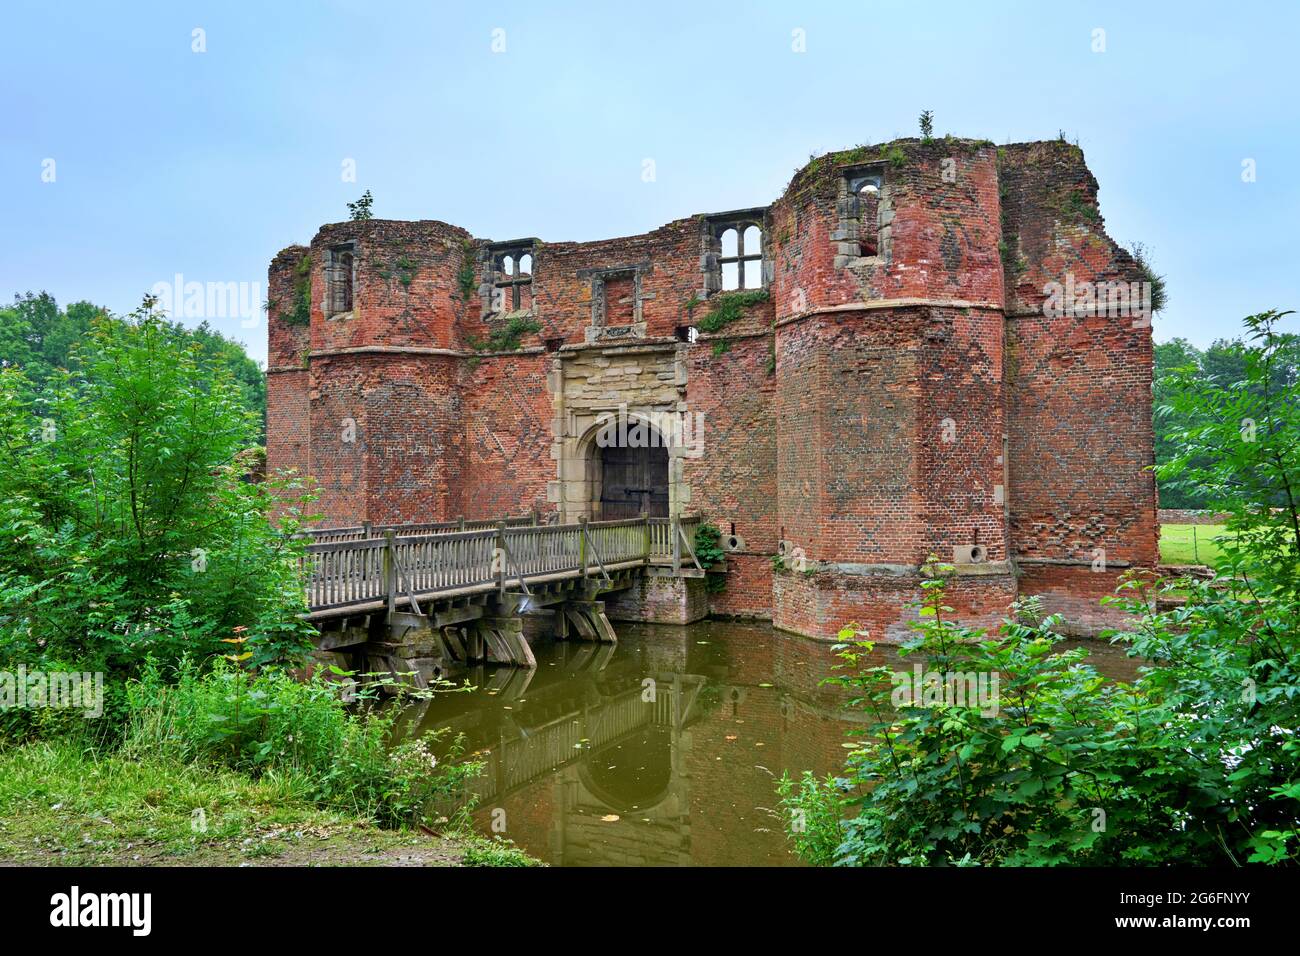 Kirby Muxloe Castle à Leicestershire, Angleterre. Banque D'Images